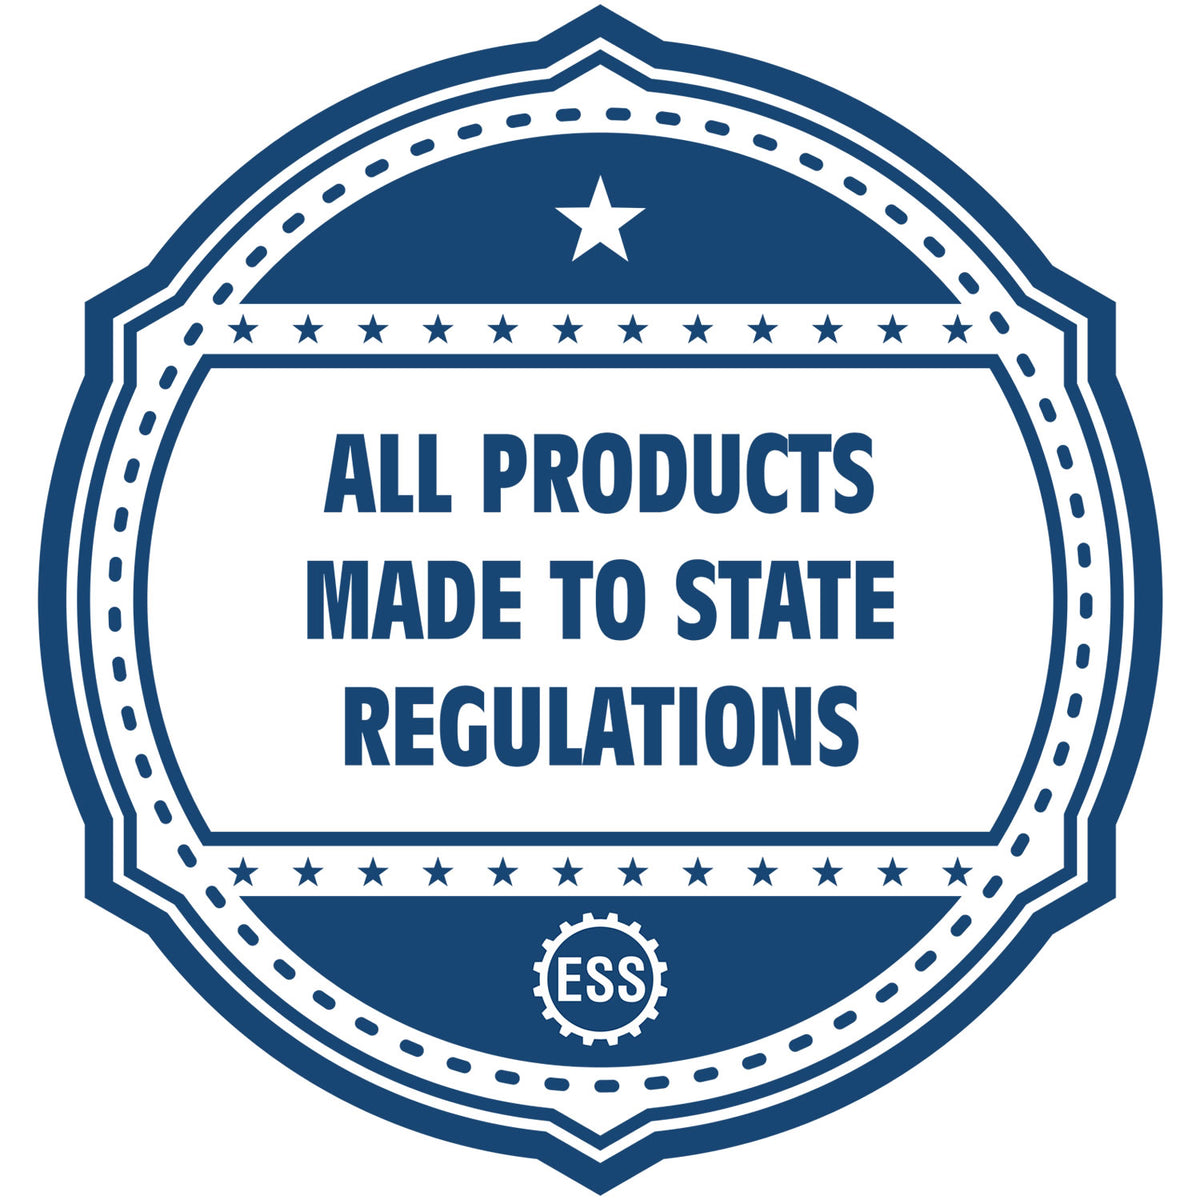 An icon or badge element for the Slim Pre-Inked North Dakota Landscape Architect Seal Stamp showing that this product is made in compliance with state regulations.